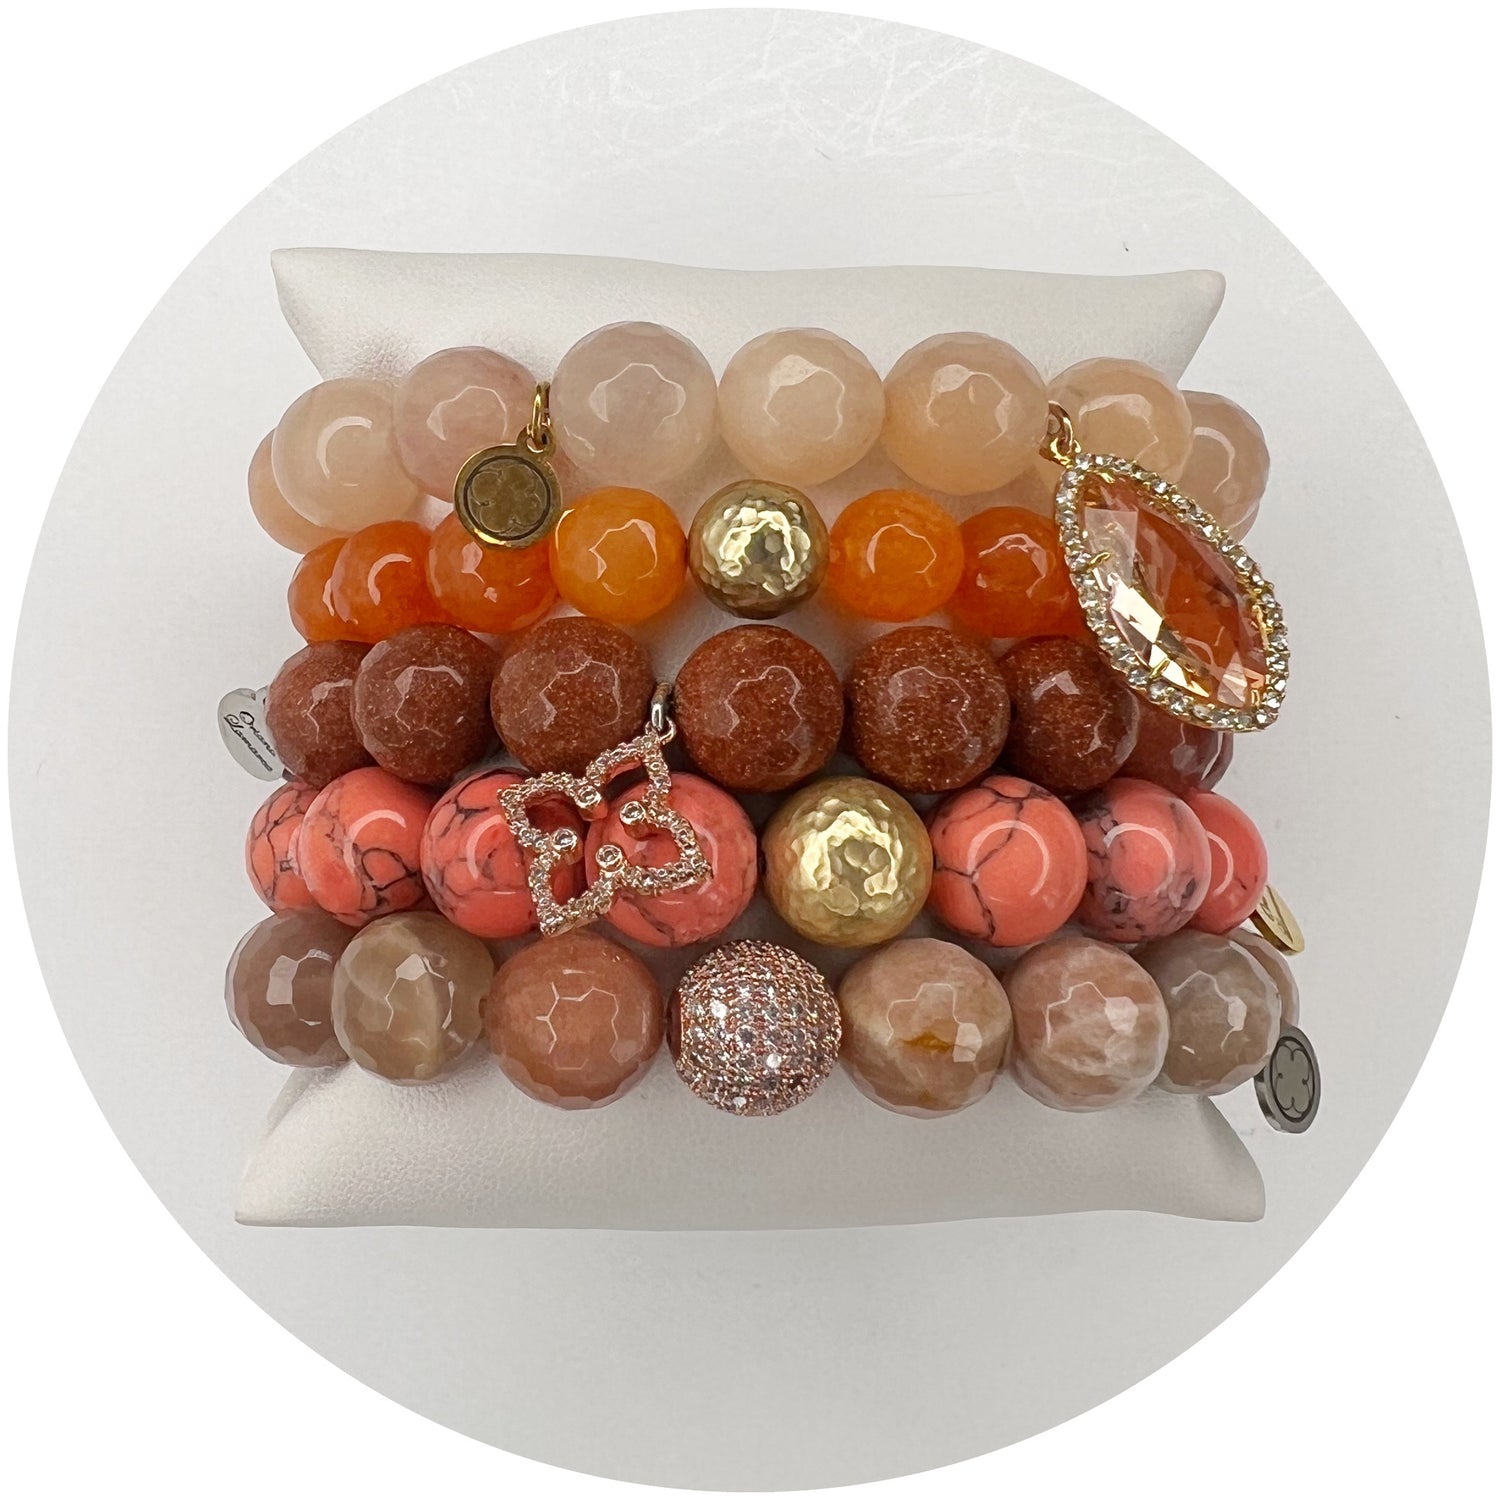 Candy Apple Armparty